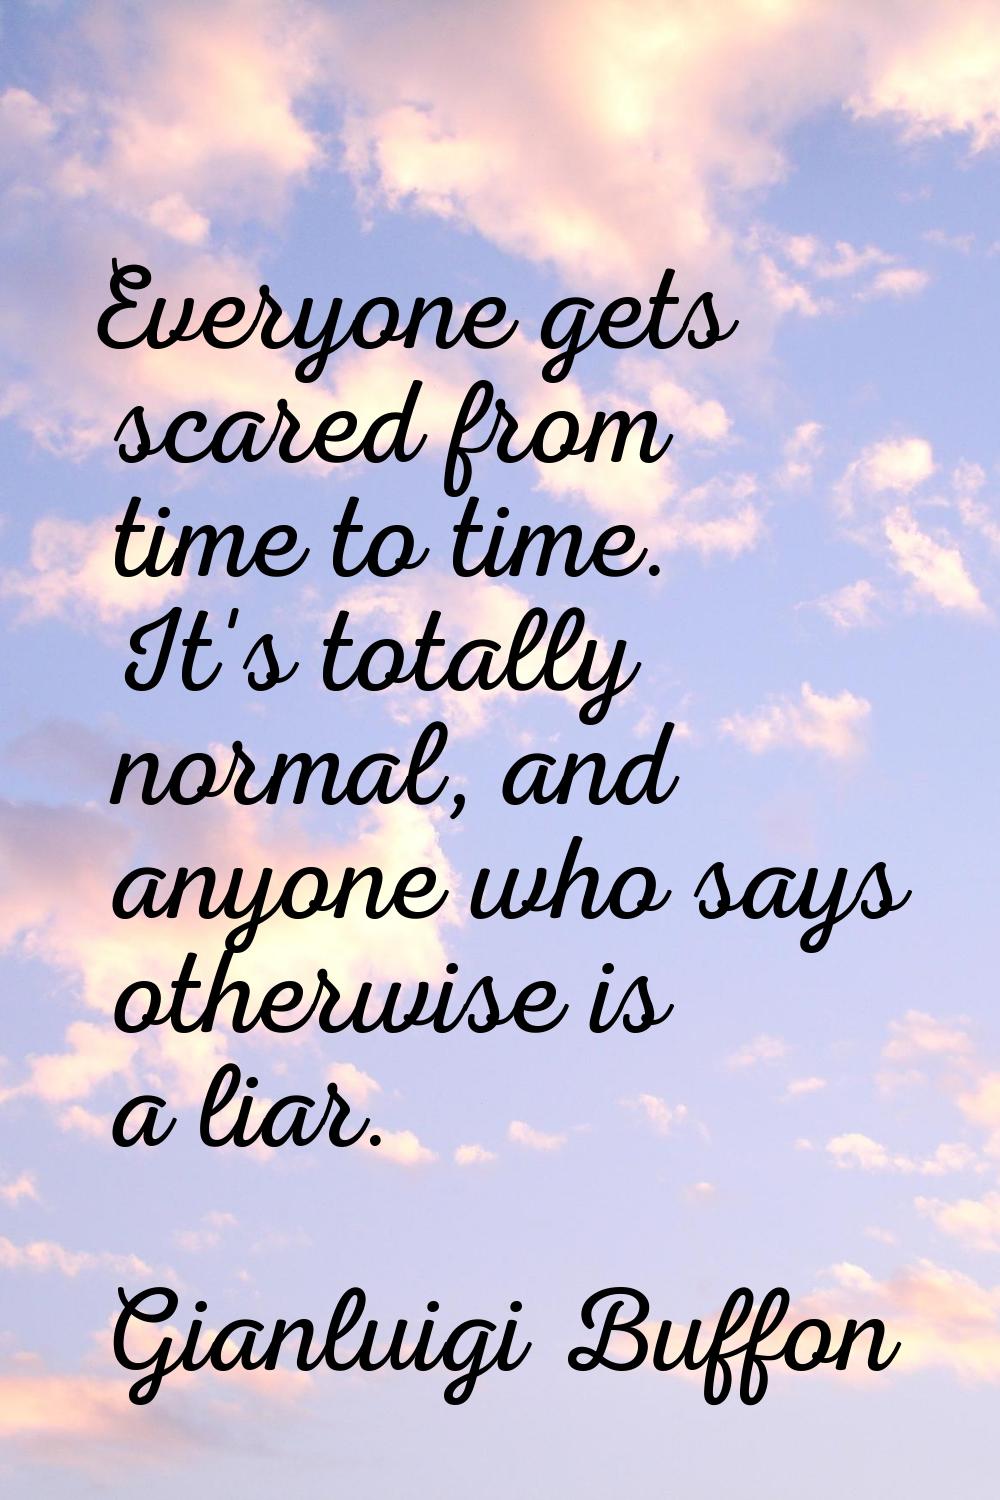 Everyone gets scared from time to time. It's totally normal, and anyone who says otherwise is a lia